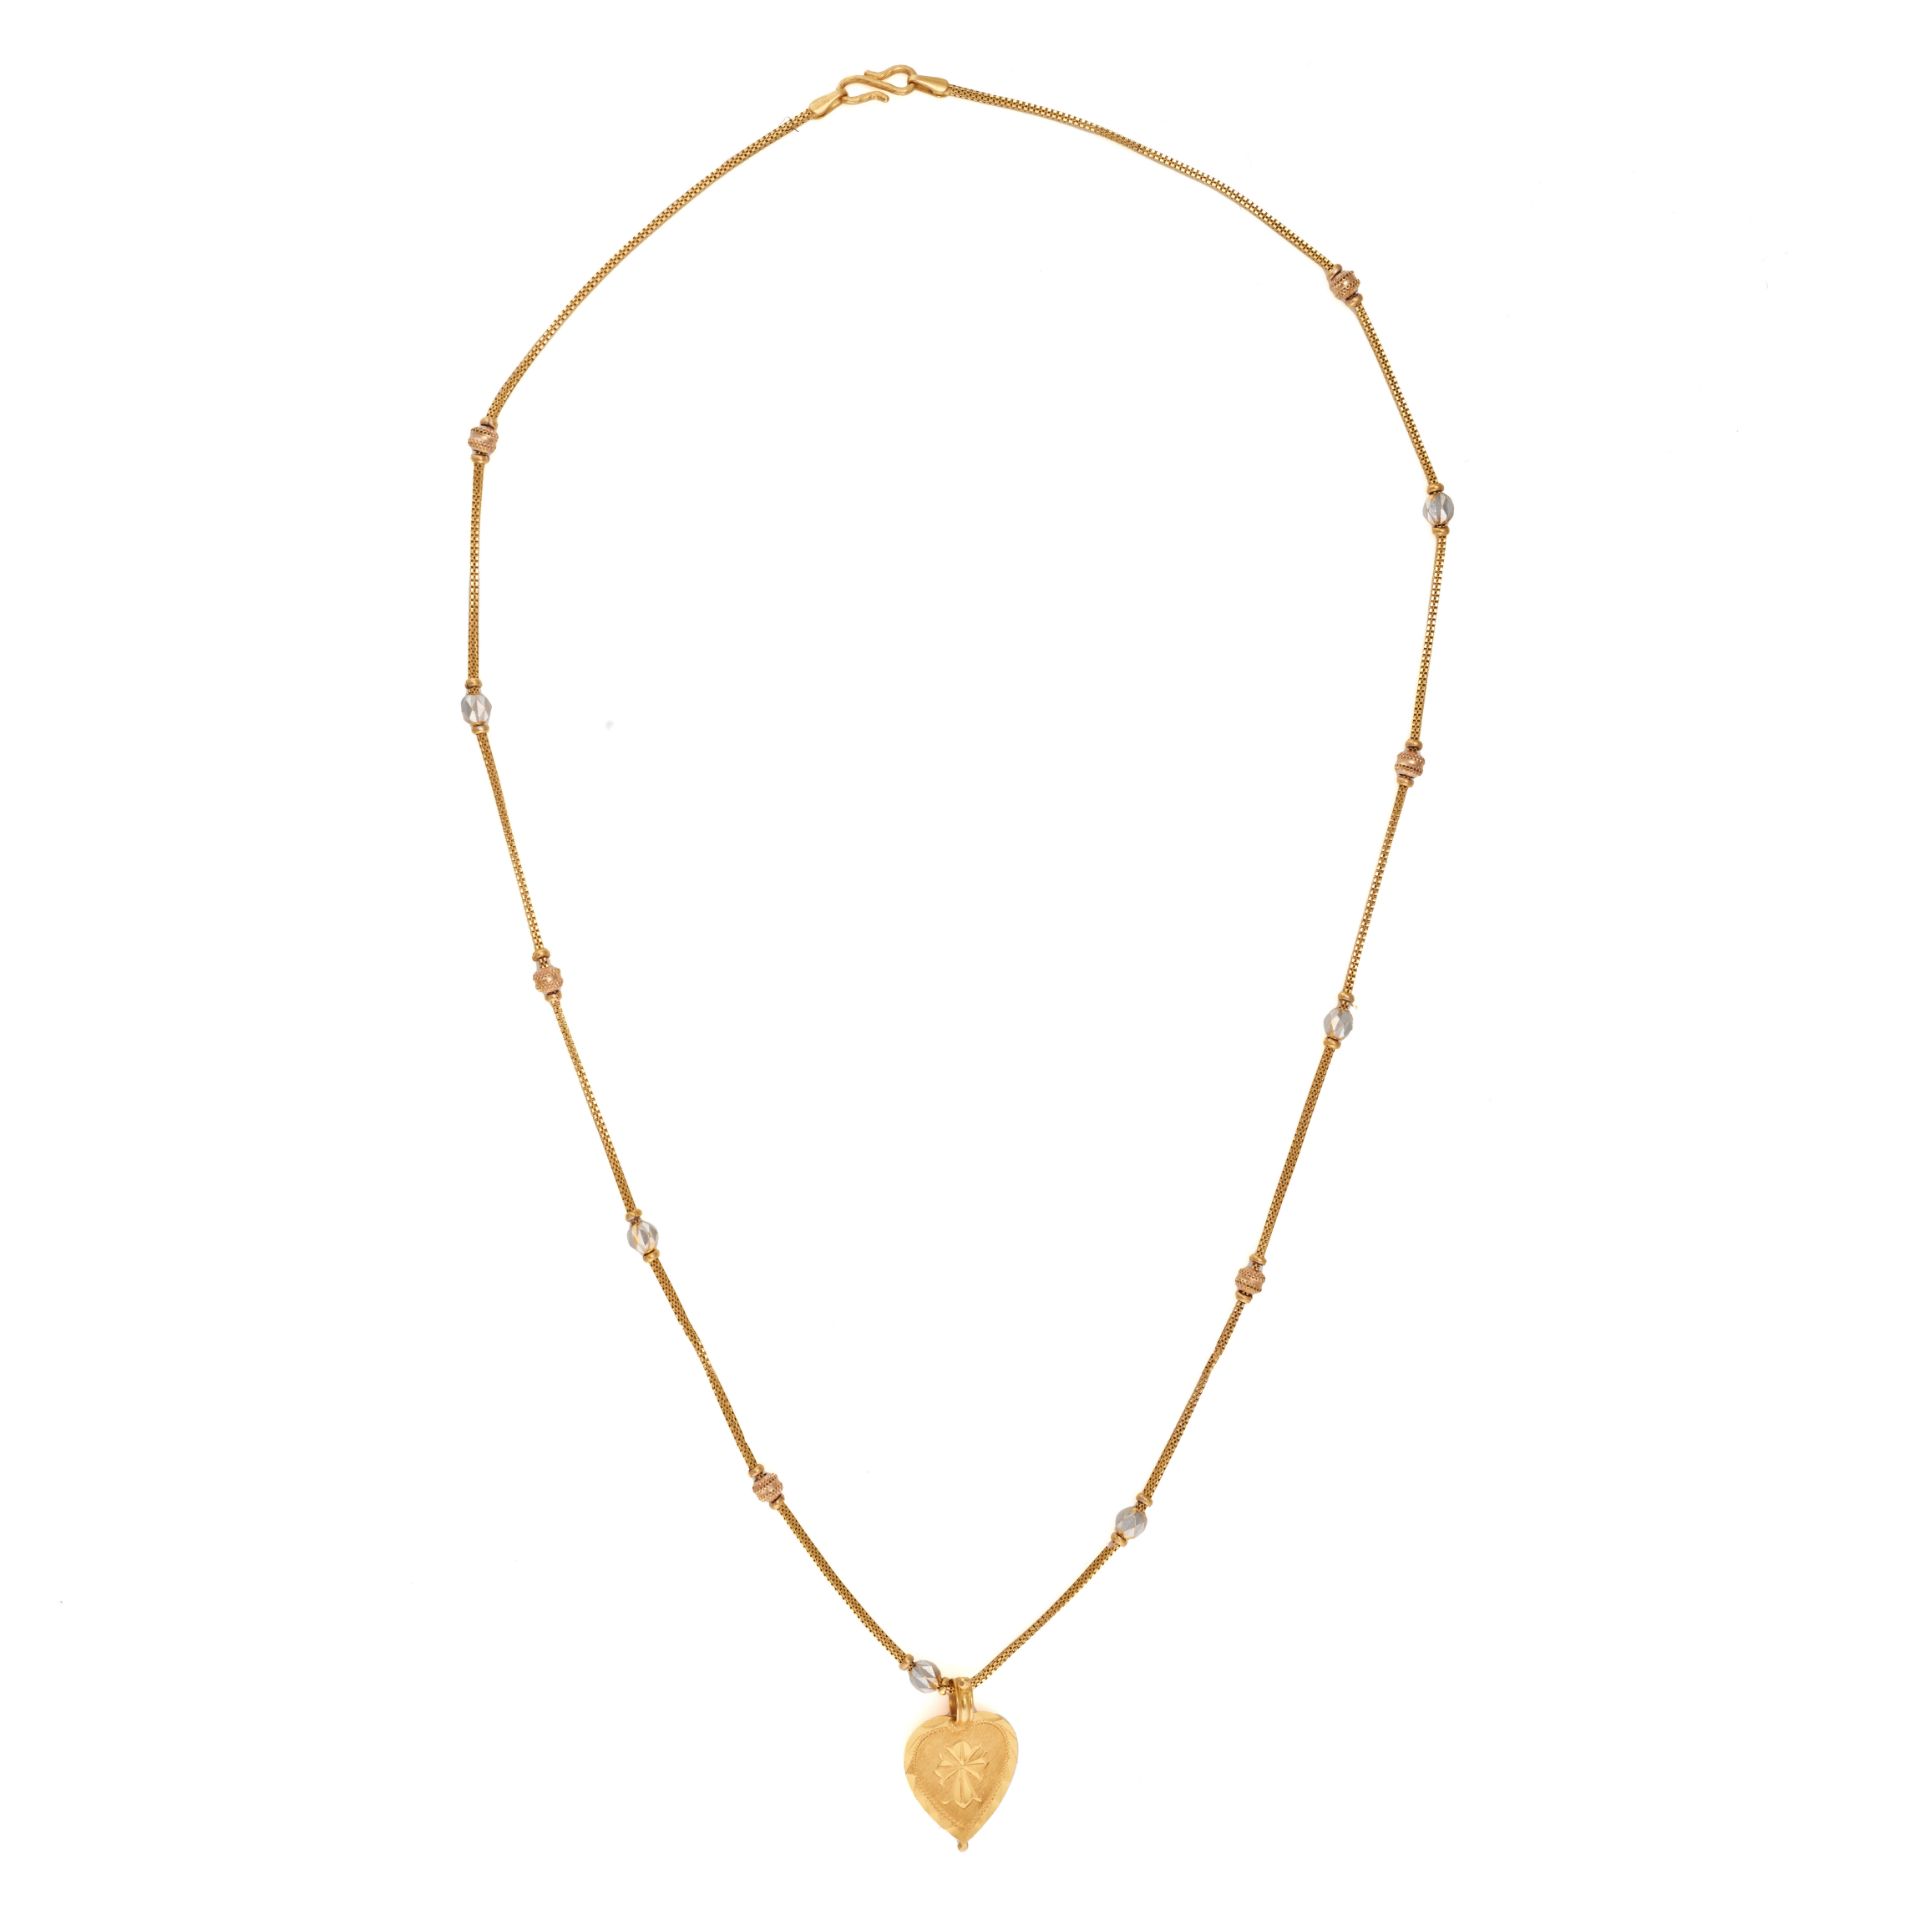 A YELLOW GOLD PENDANT NECKLACE in 22ct gold, a pendant suspended from a chain with intersecting w...